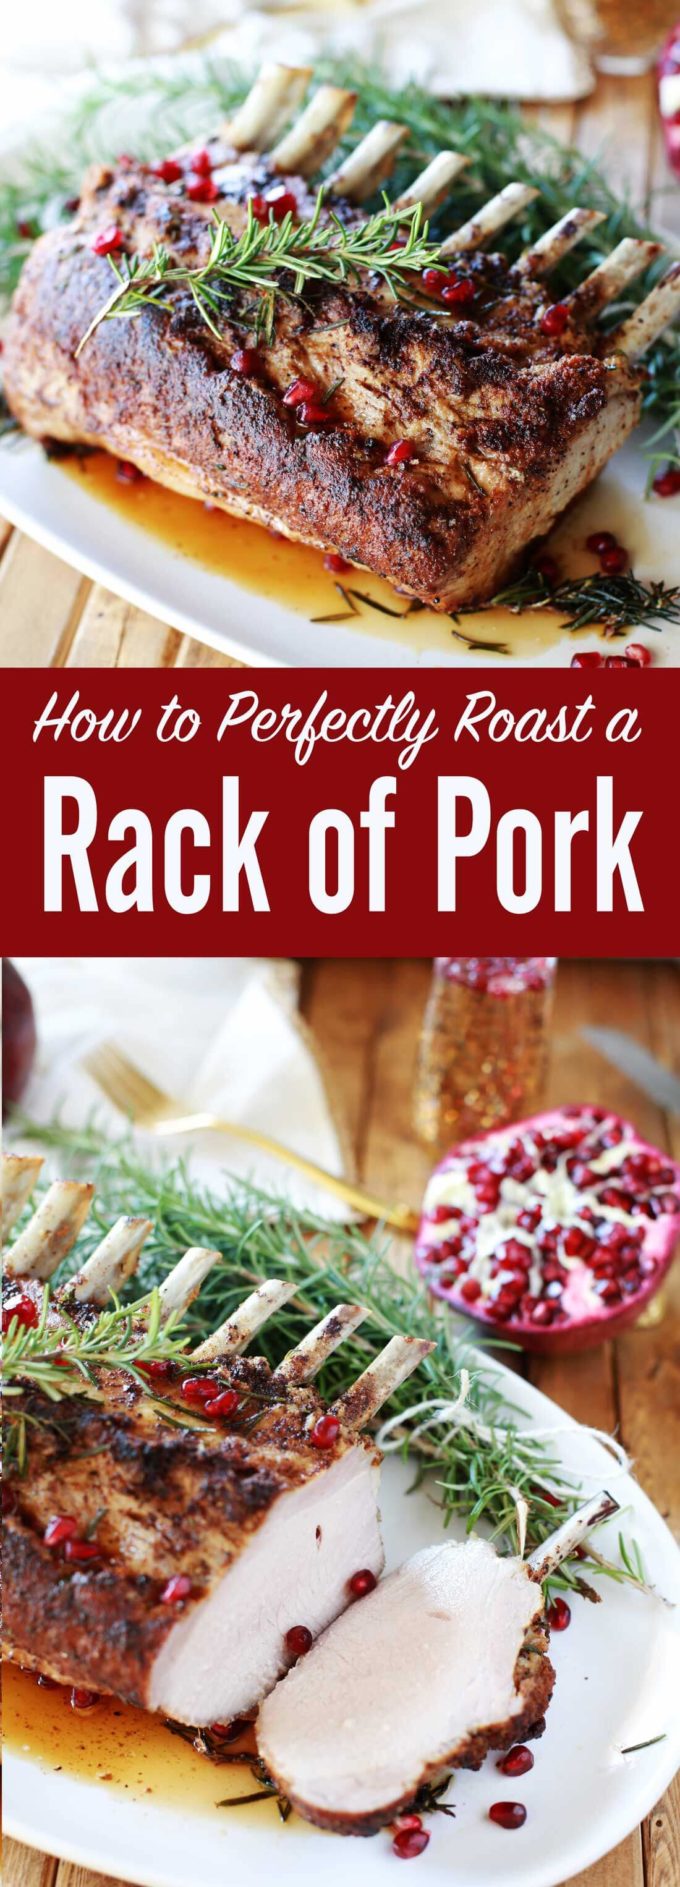 How to Roast Pork Rack: How to Perfectly Roast a Rack of Pork: juicy, tender, and super flavorful anyone? Following this method will help you get the best rack of pork you have ever eaten. Compliments guaranteed.